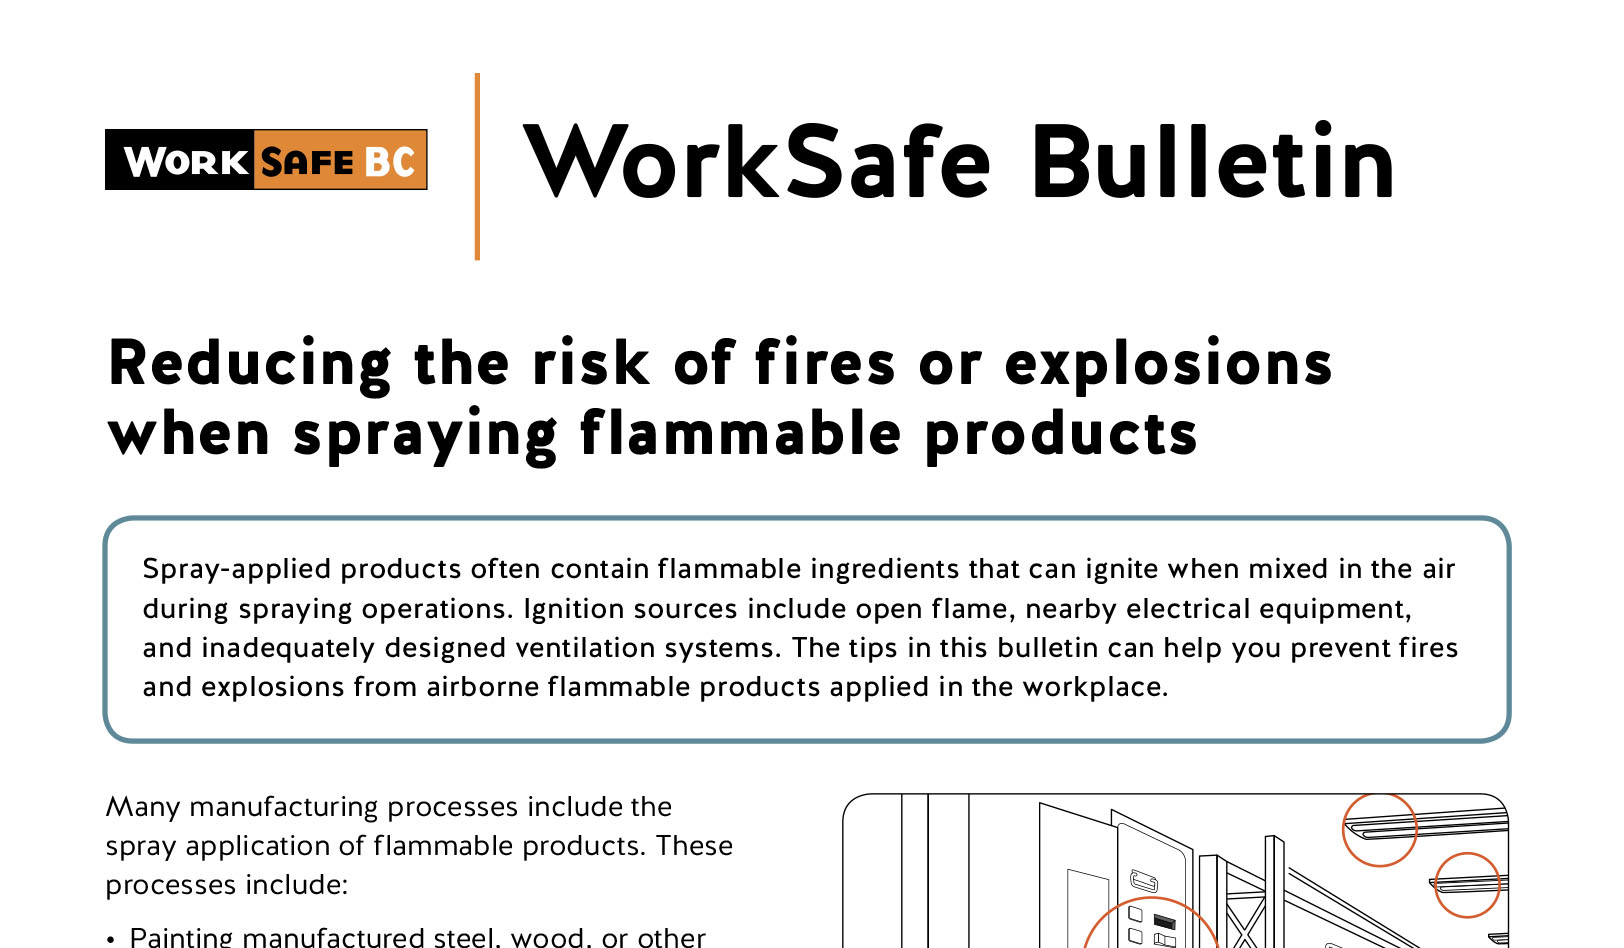 Reducing the Risk of Fires or Explosions When Spraying Flammable Products, WorkSafeBC Link